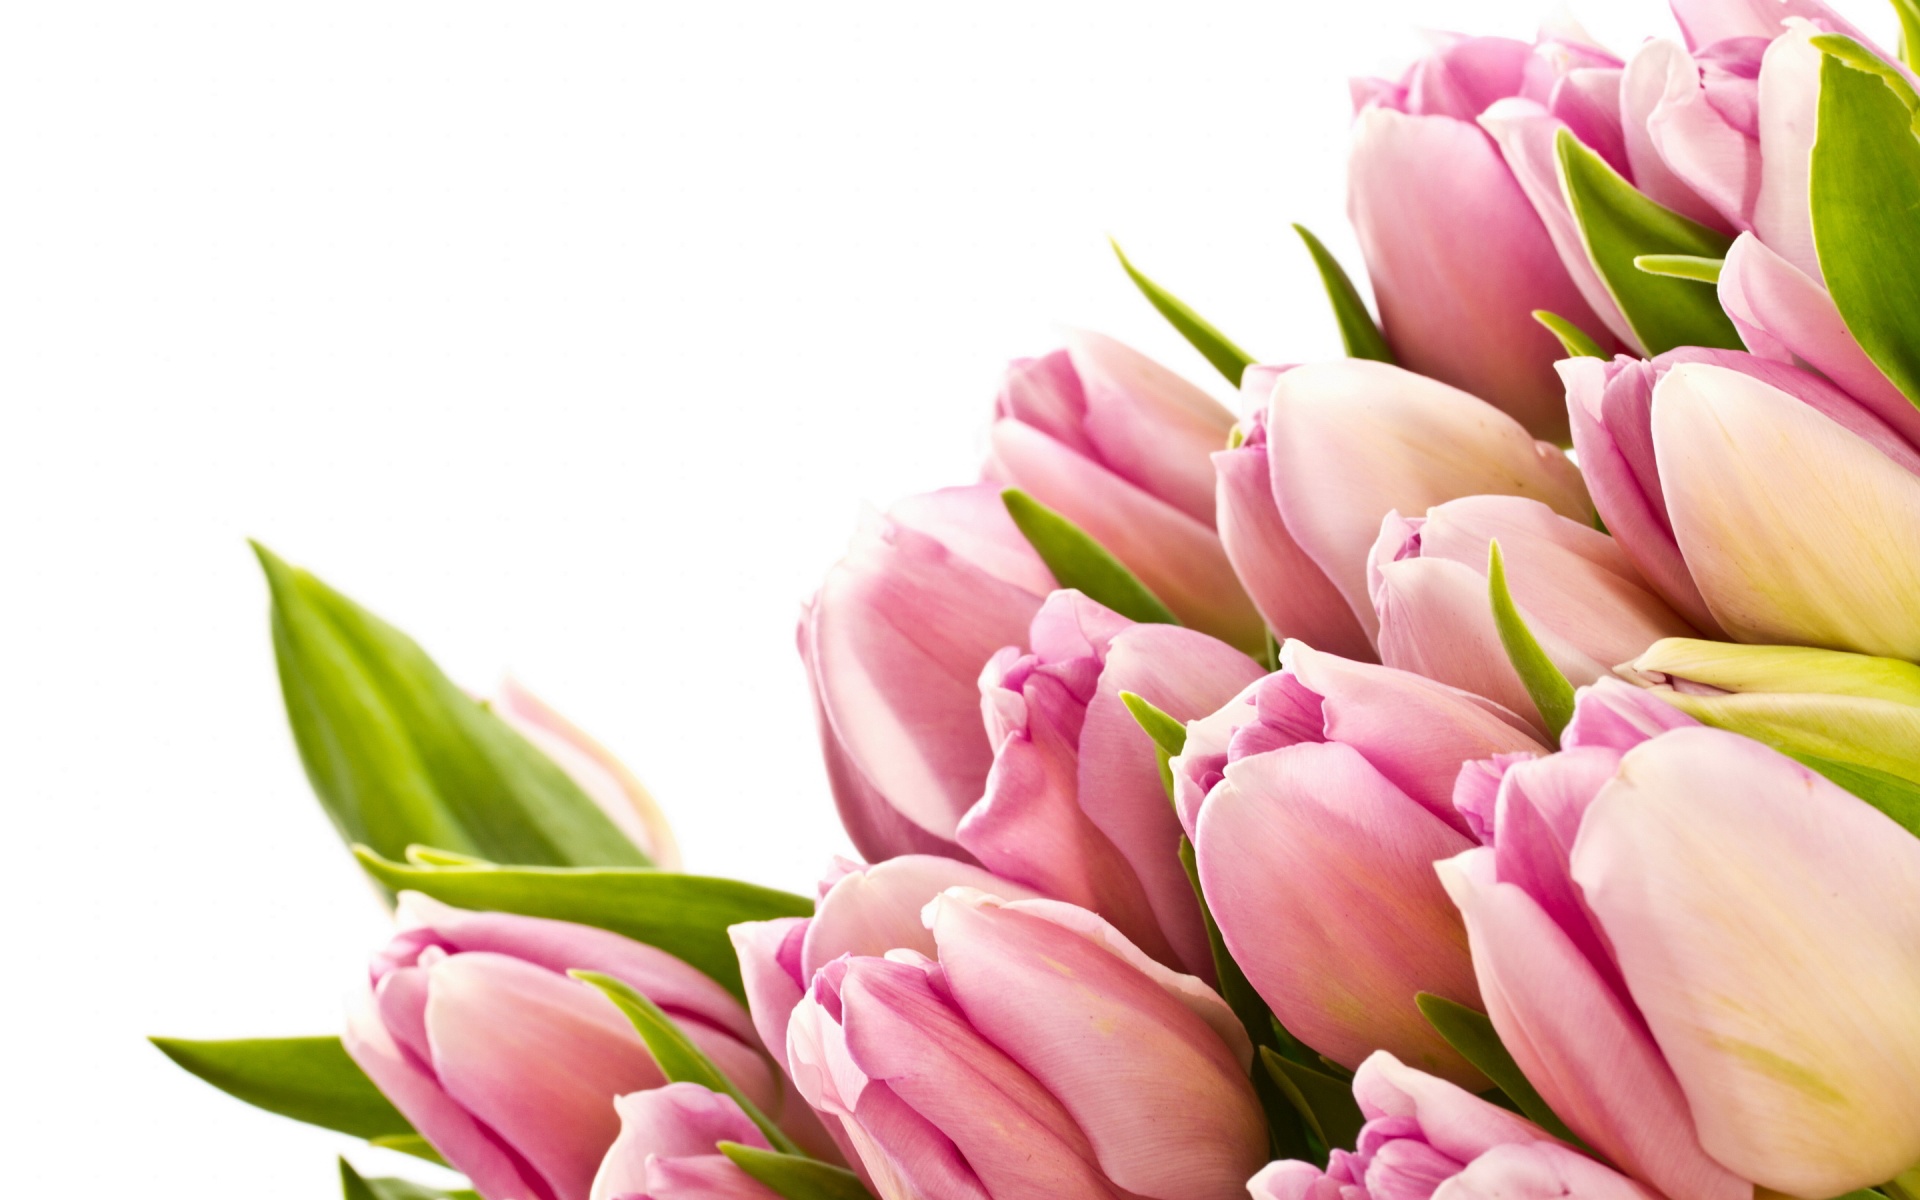 Lovely And Beautiful Buds Pink Tulips HigHDifinition Image